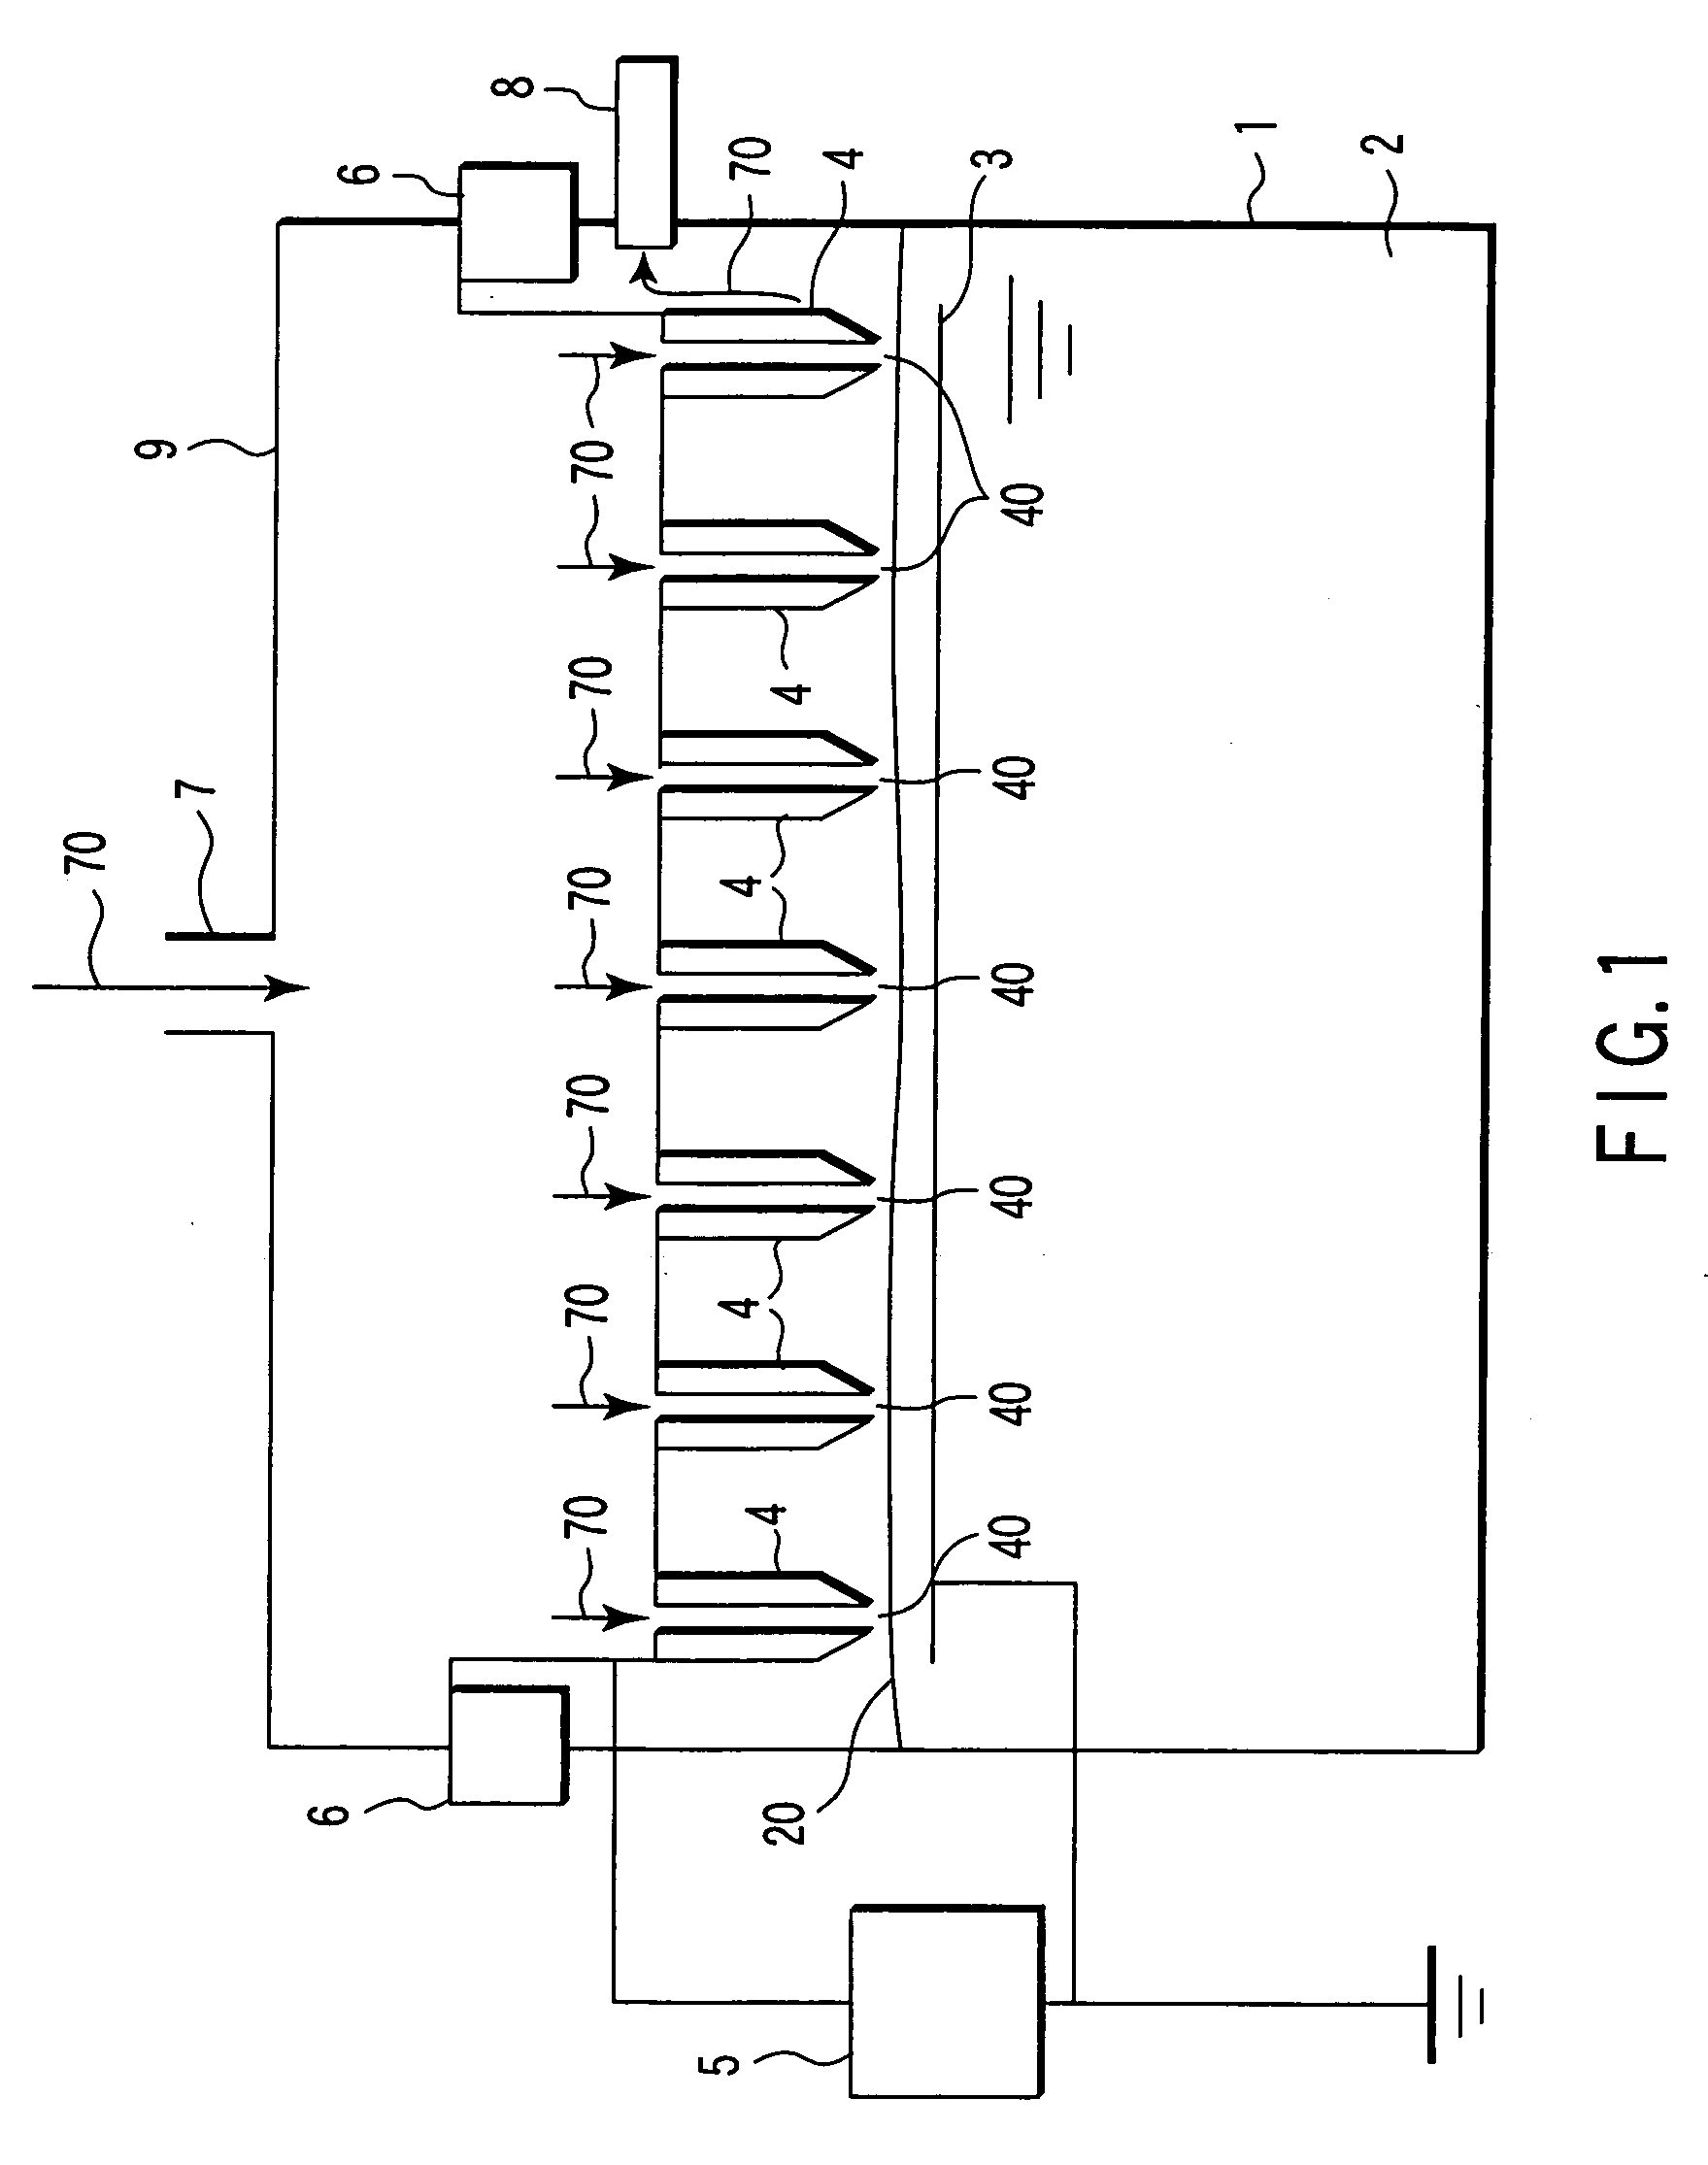 Apparatus for decomposing organic matter with radical treatment method using electric discharge